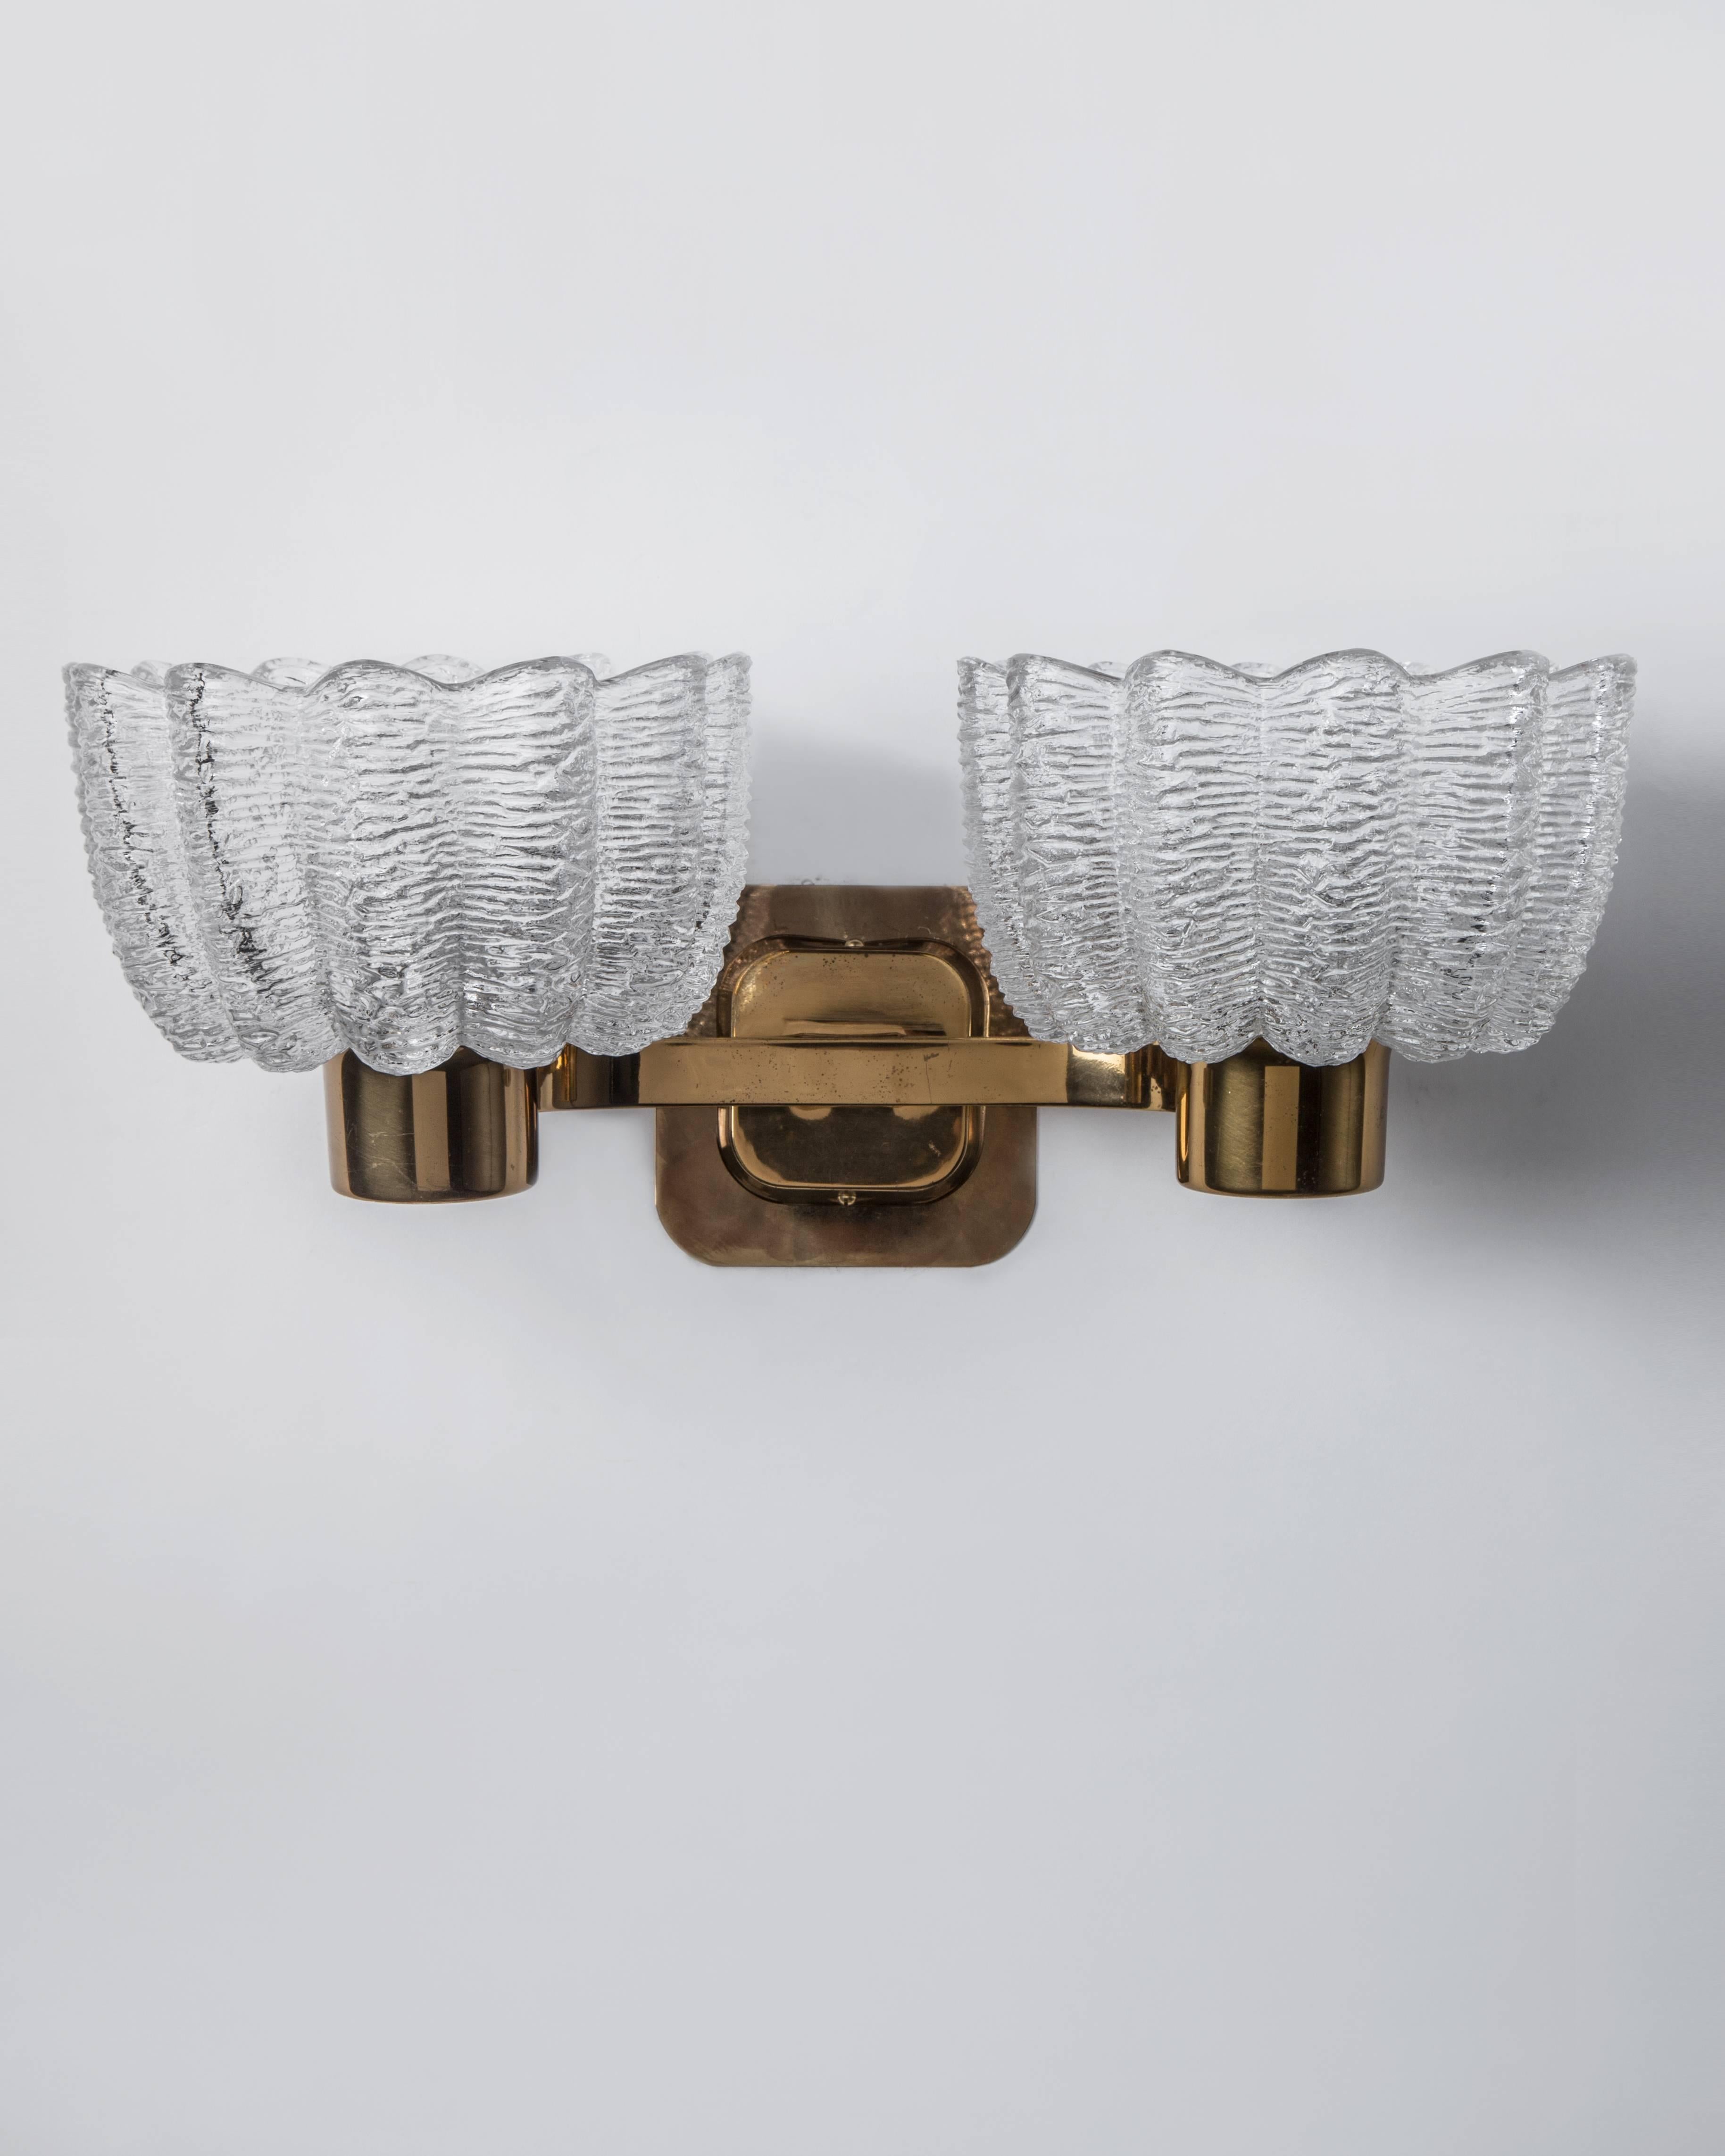 AIS2973.
A pair of vintage mid century modern sconces with thick, clear textured lobed glass shades and aged brass metalwork. Due to the antique nature of this fixture, there may be some nicks or imperfections in the glass.

Dimensions:
Overall: